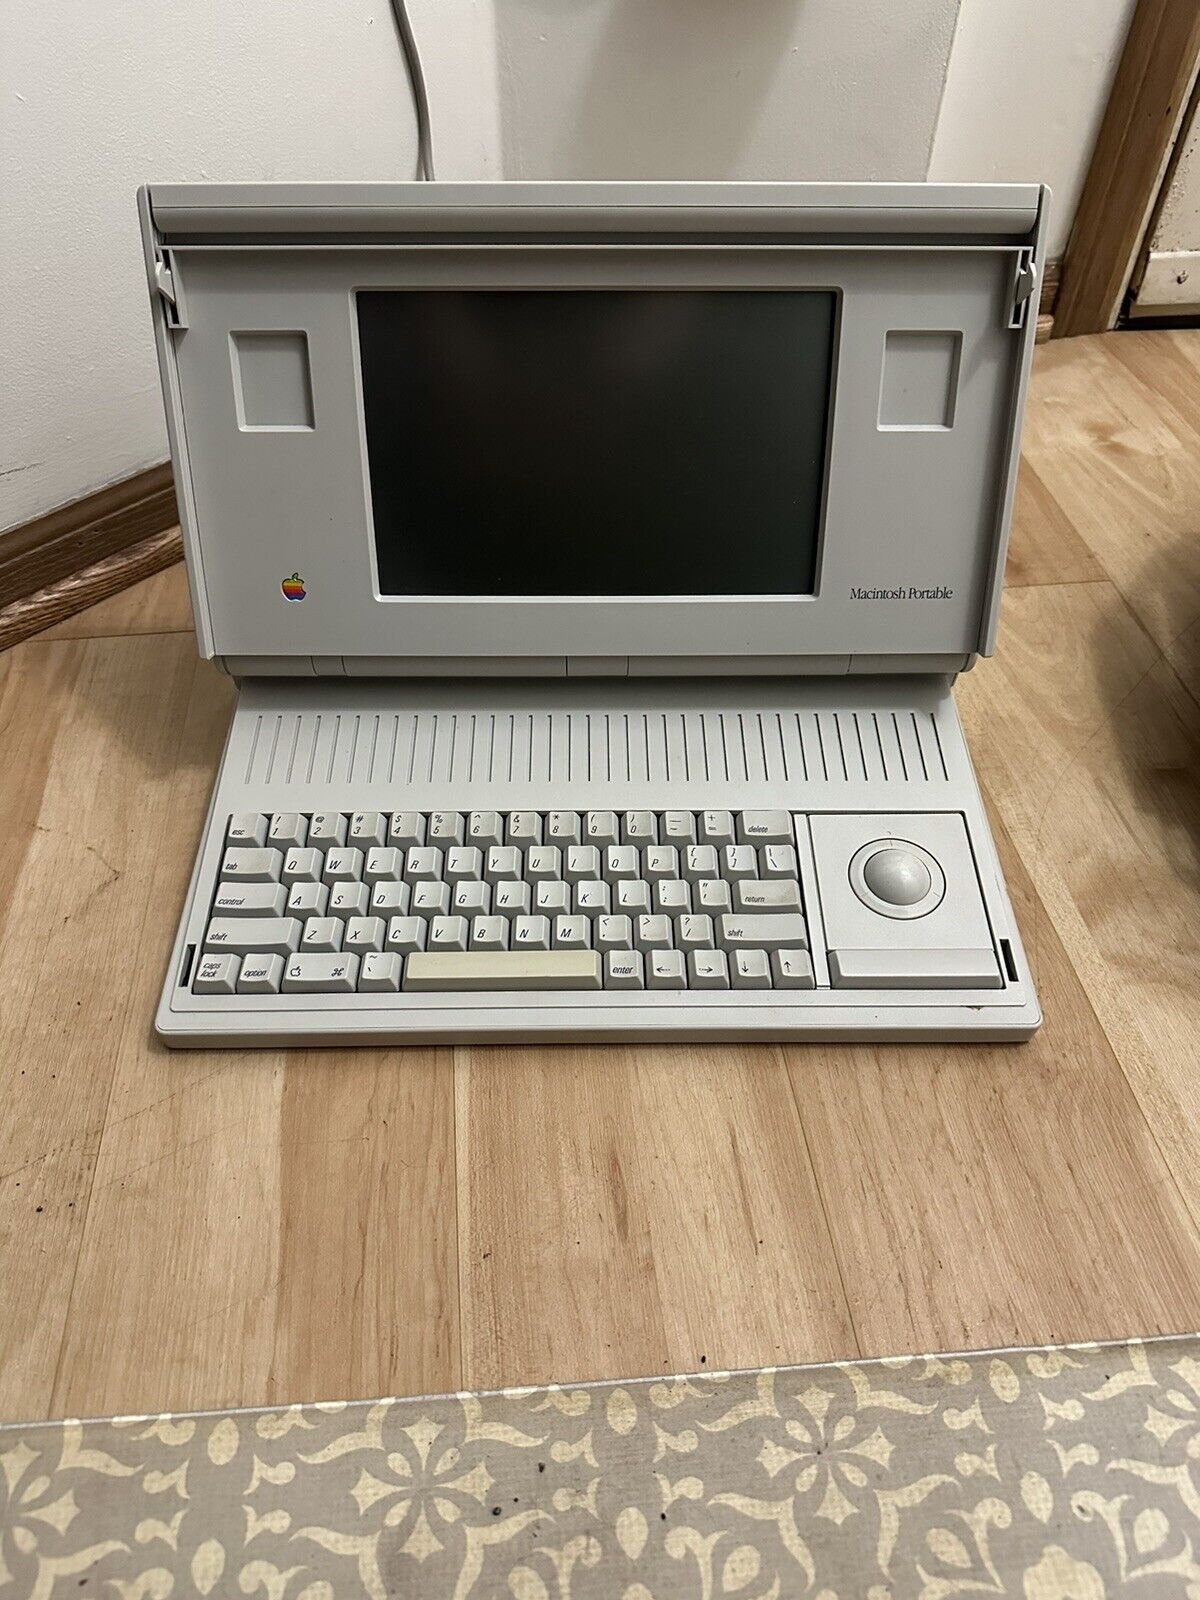 Apple Macintosh M5120 Portable Working Booted Up For Me Not Sure If Needs Repair